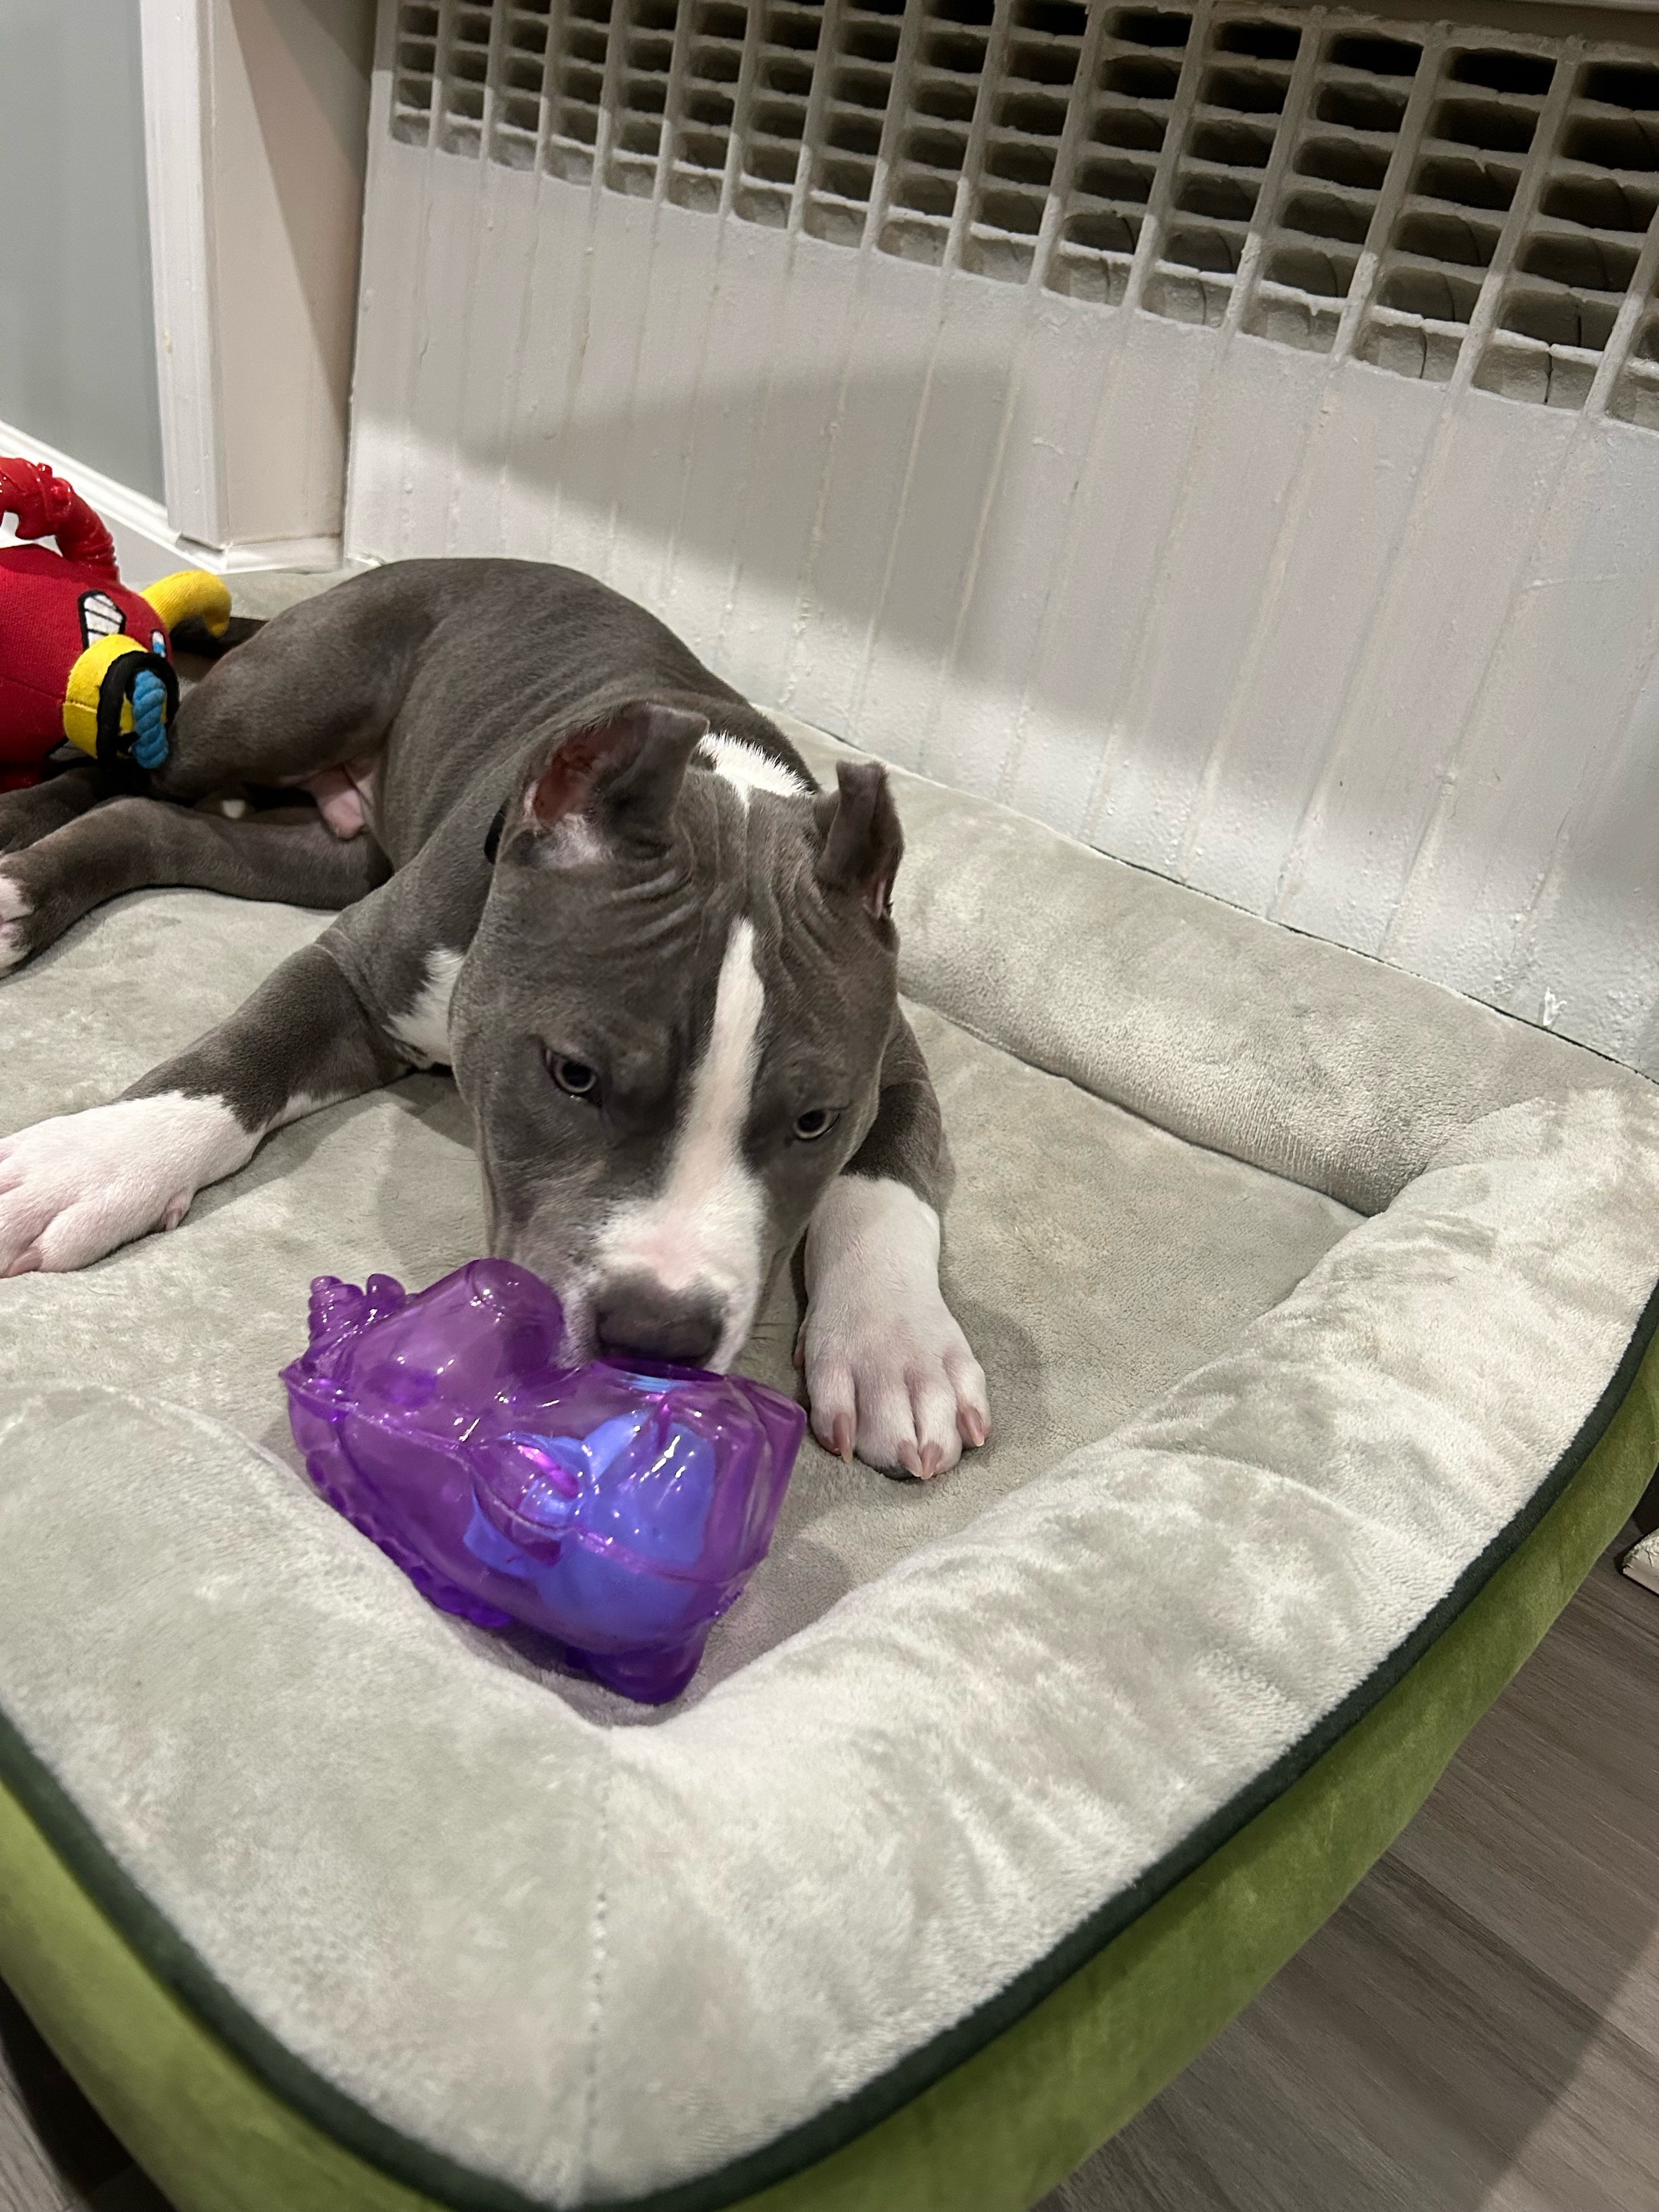 A dog playing on a dog bed with a purple unicorn-shaped toy